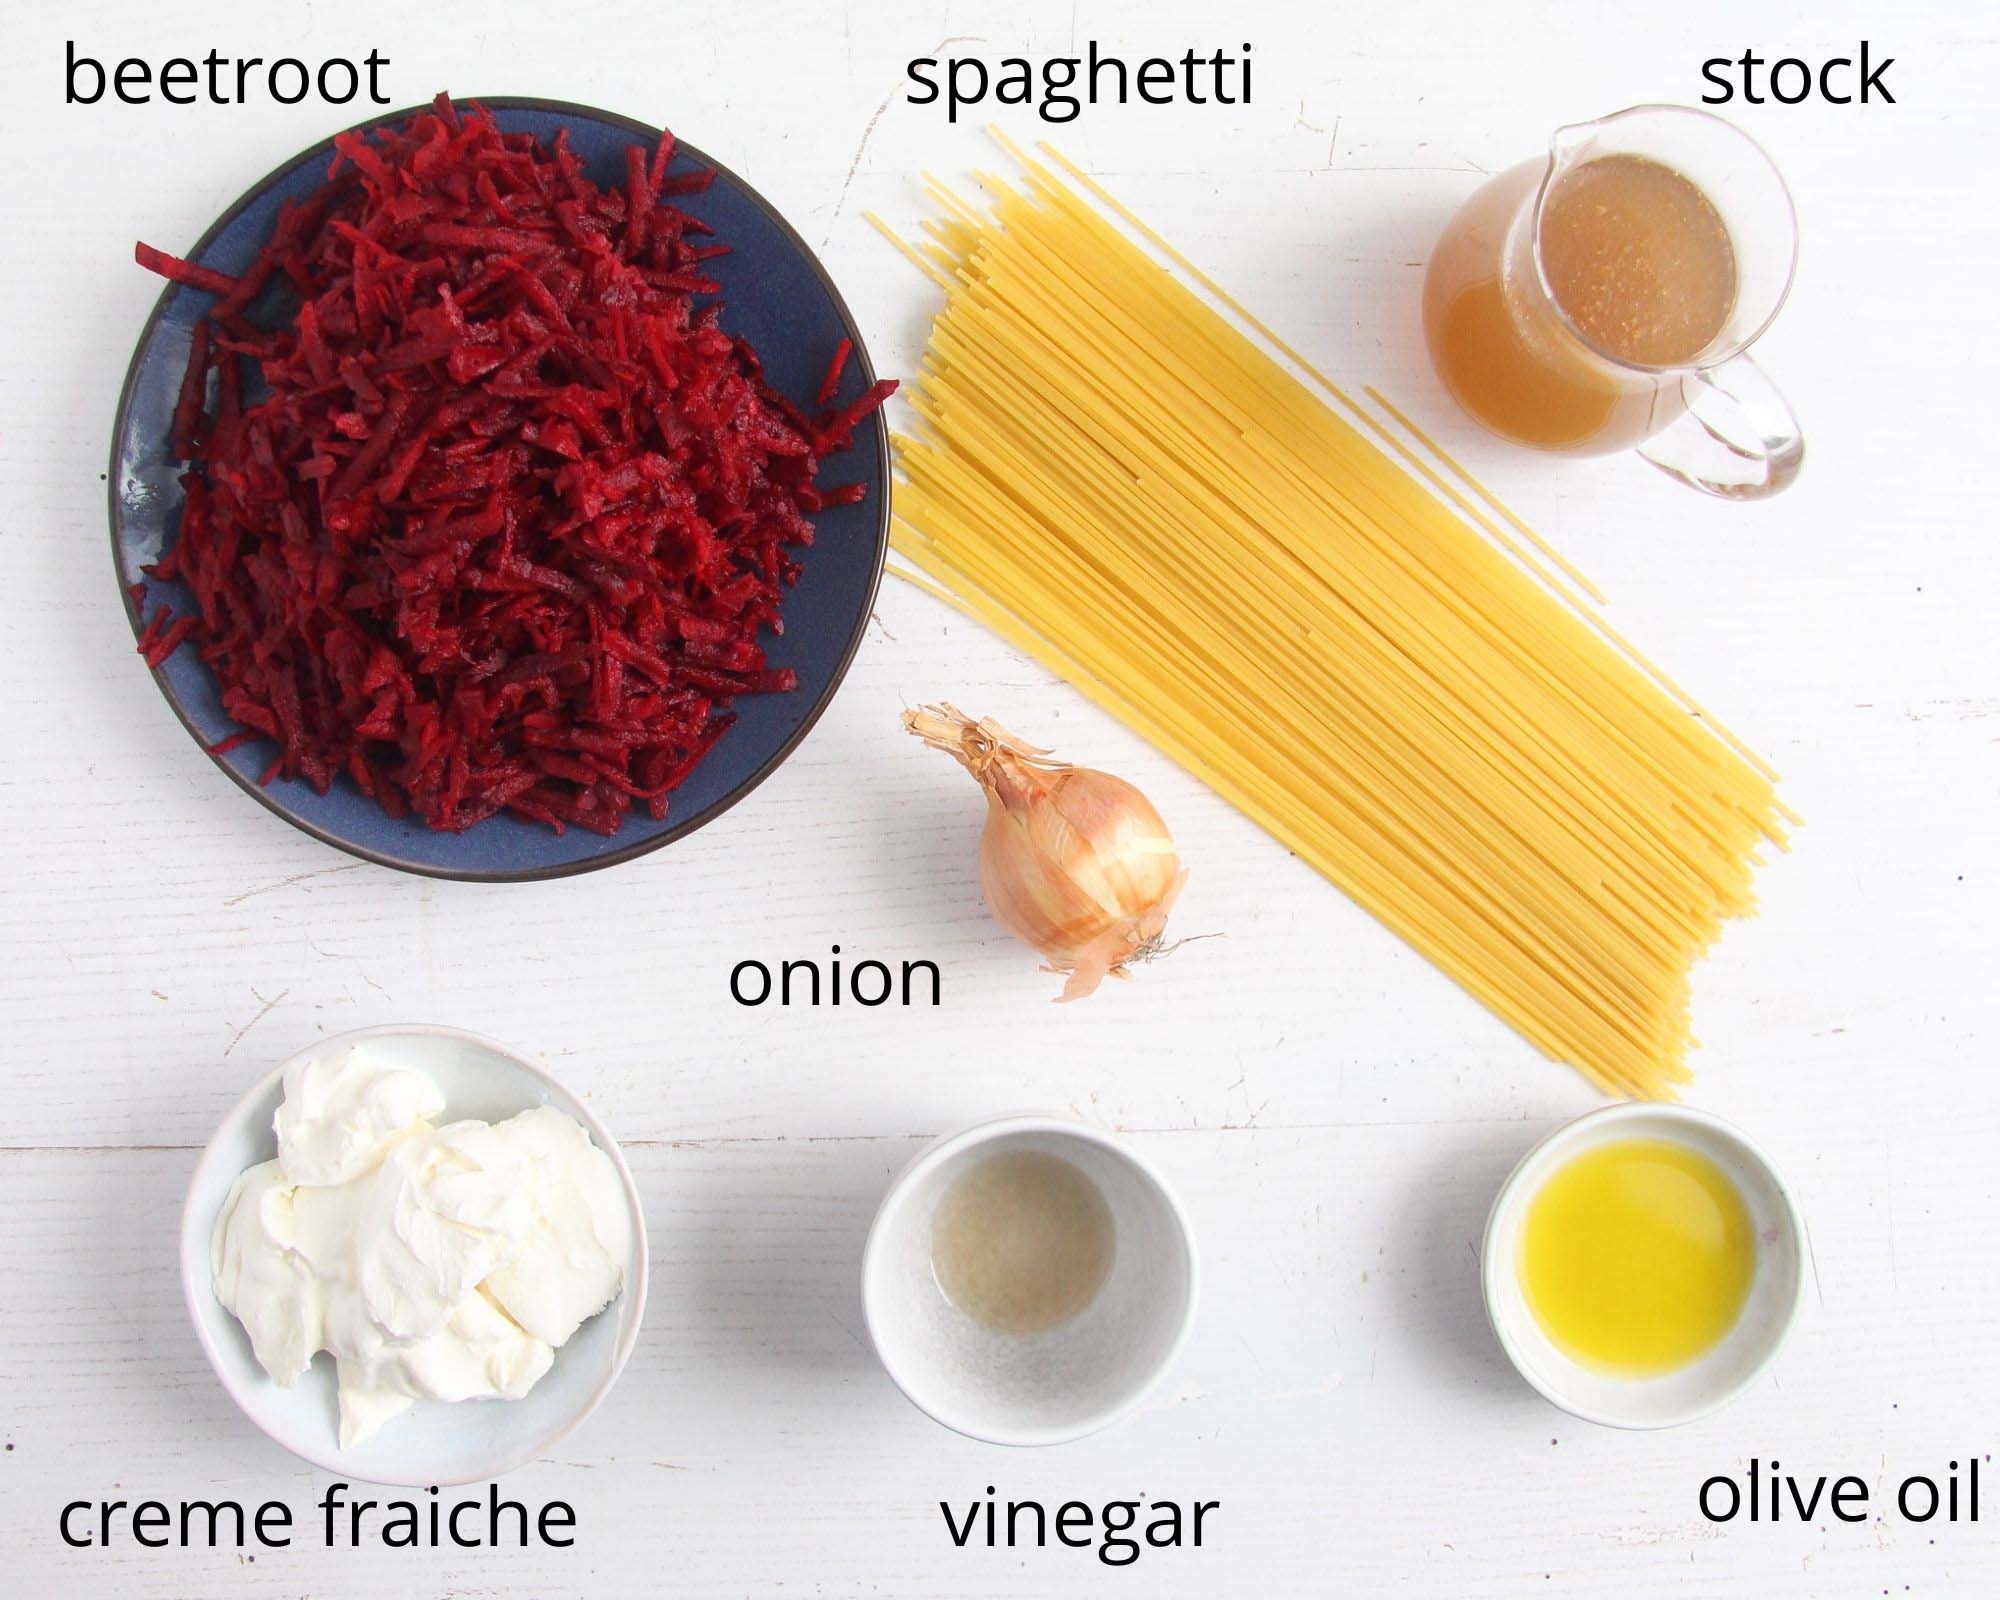 grated beets, spaghetti, onion, stock, creme fraice, vinegar and oil for making sauce